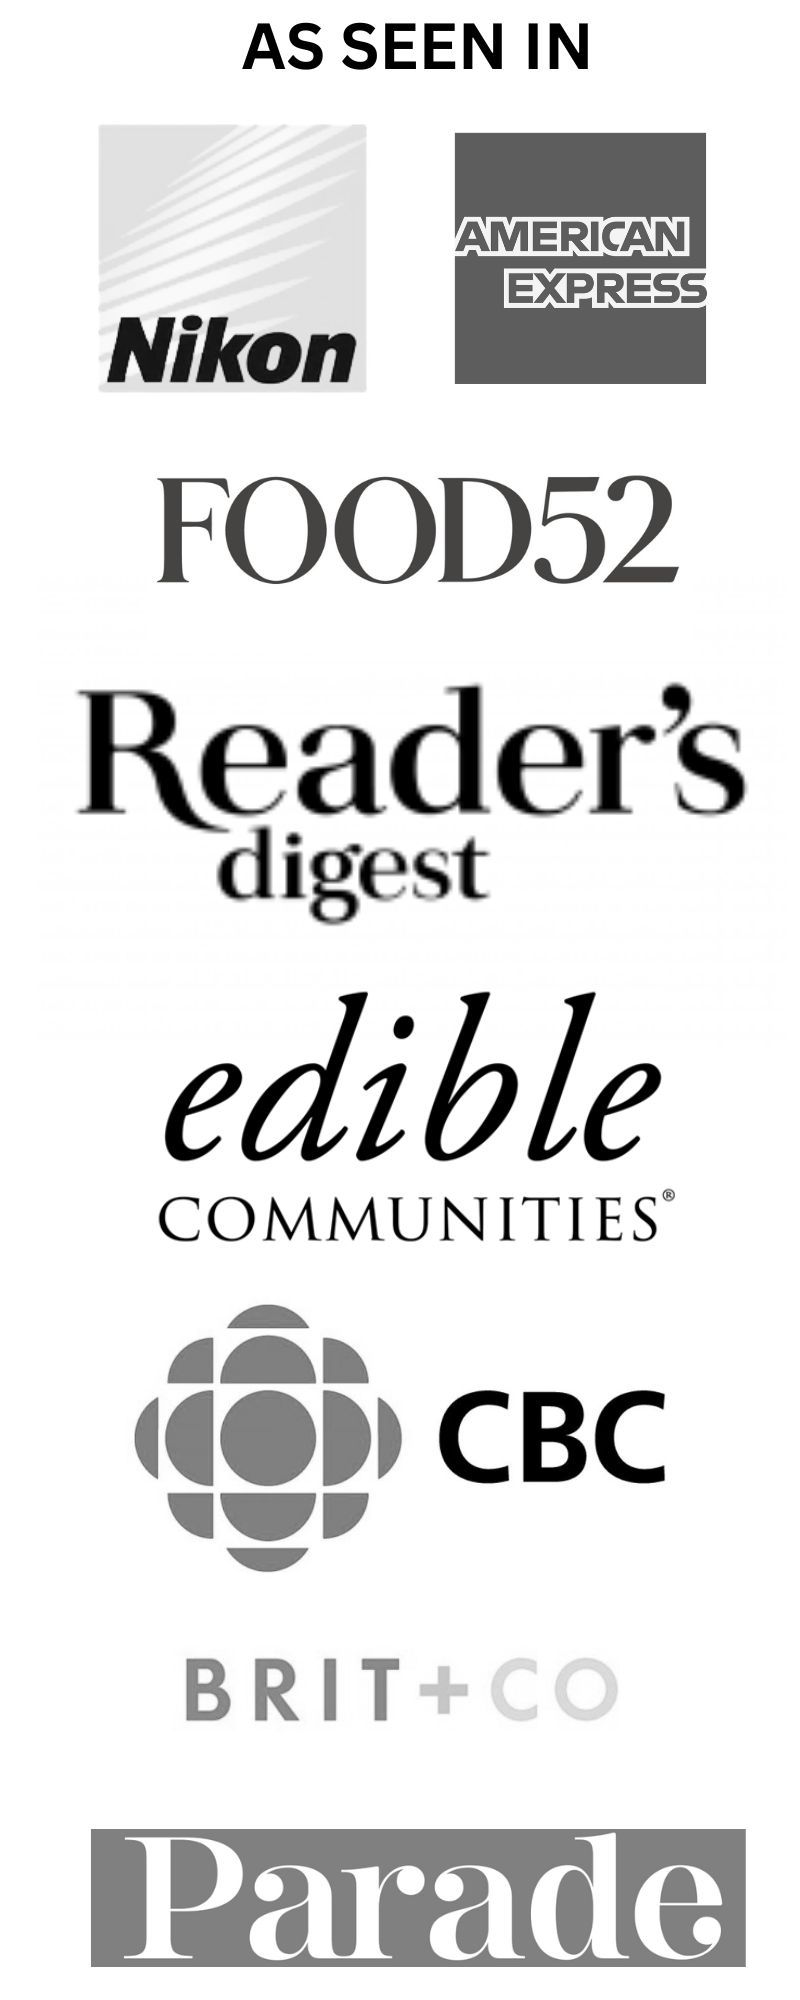 As Seen In logos for Nikon, CBC, Readers Digest, Brit+Co, AMEX, Parade and Food52, Edible Communities.